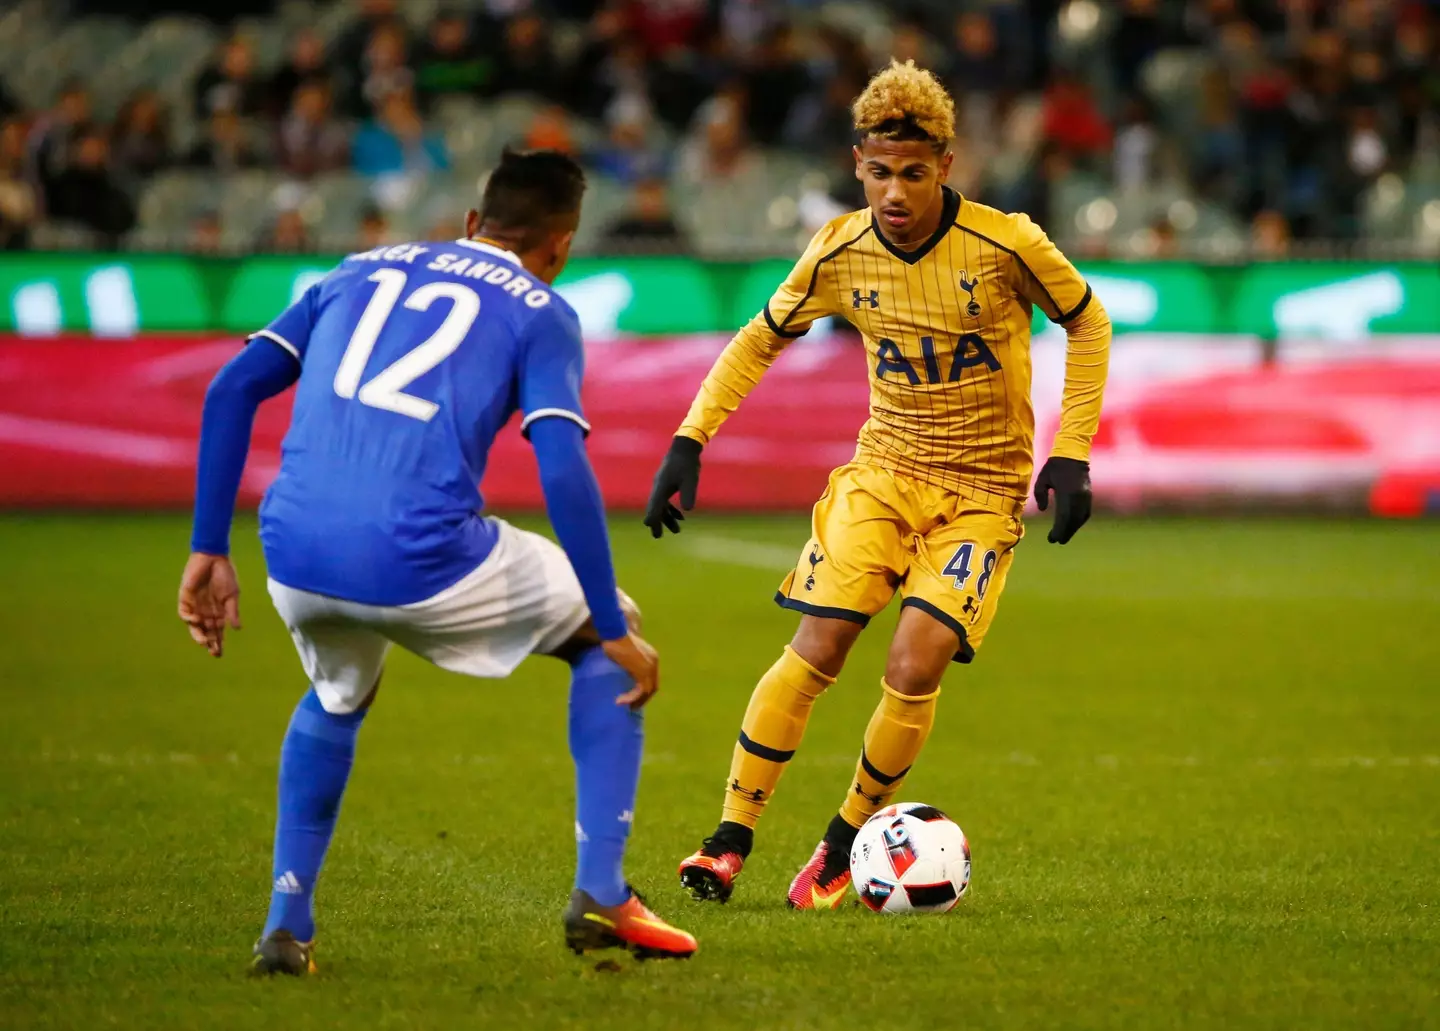 Edwards in a pre-season friendly against Juventus in 2016. (Image